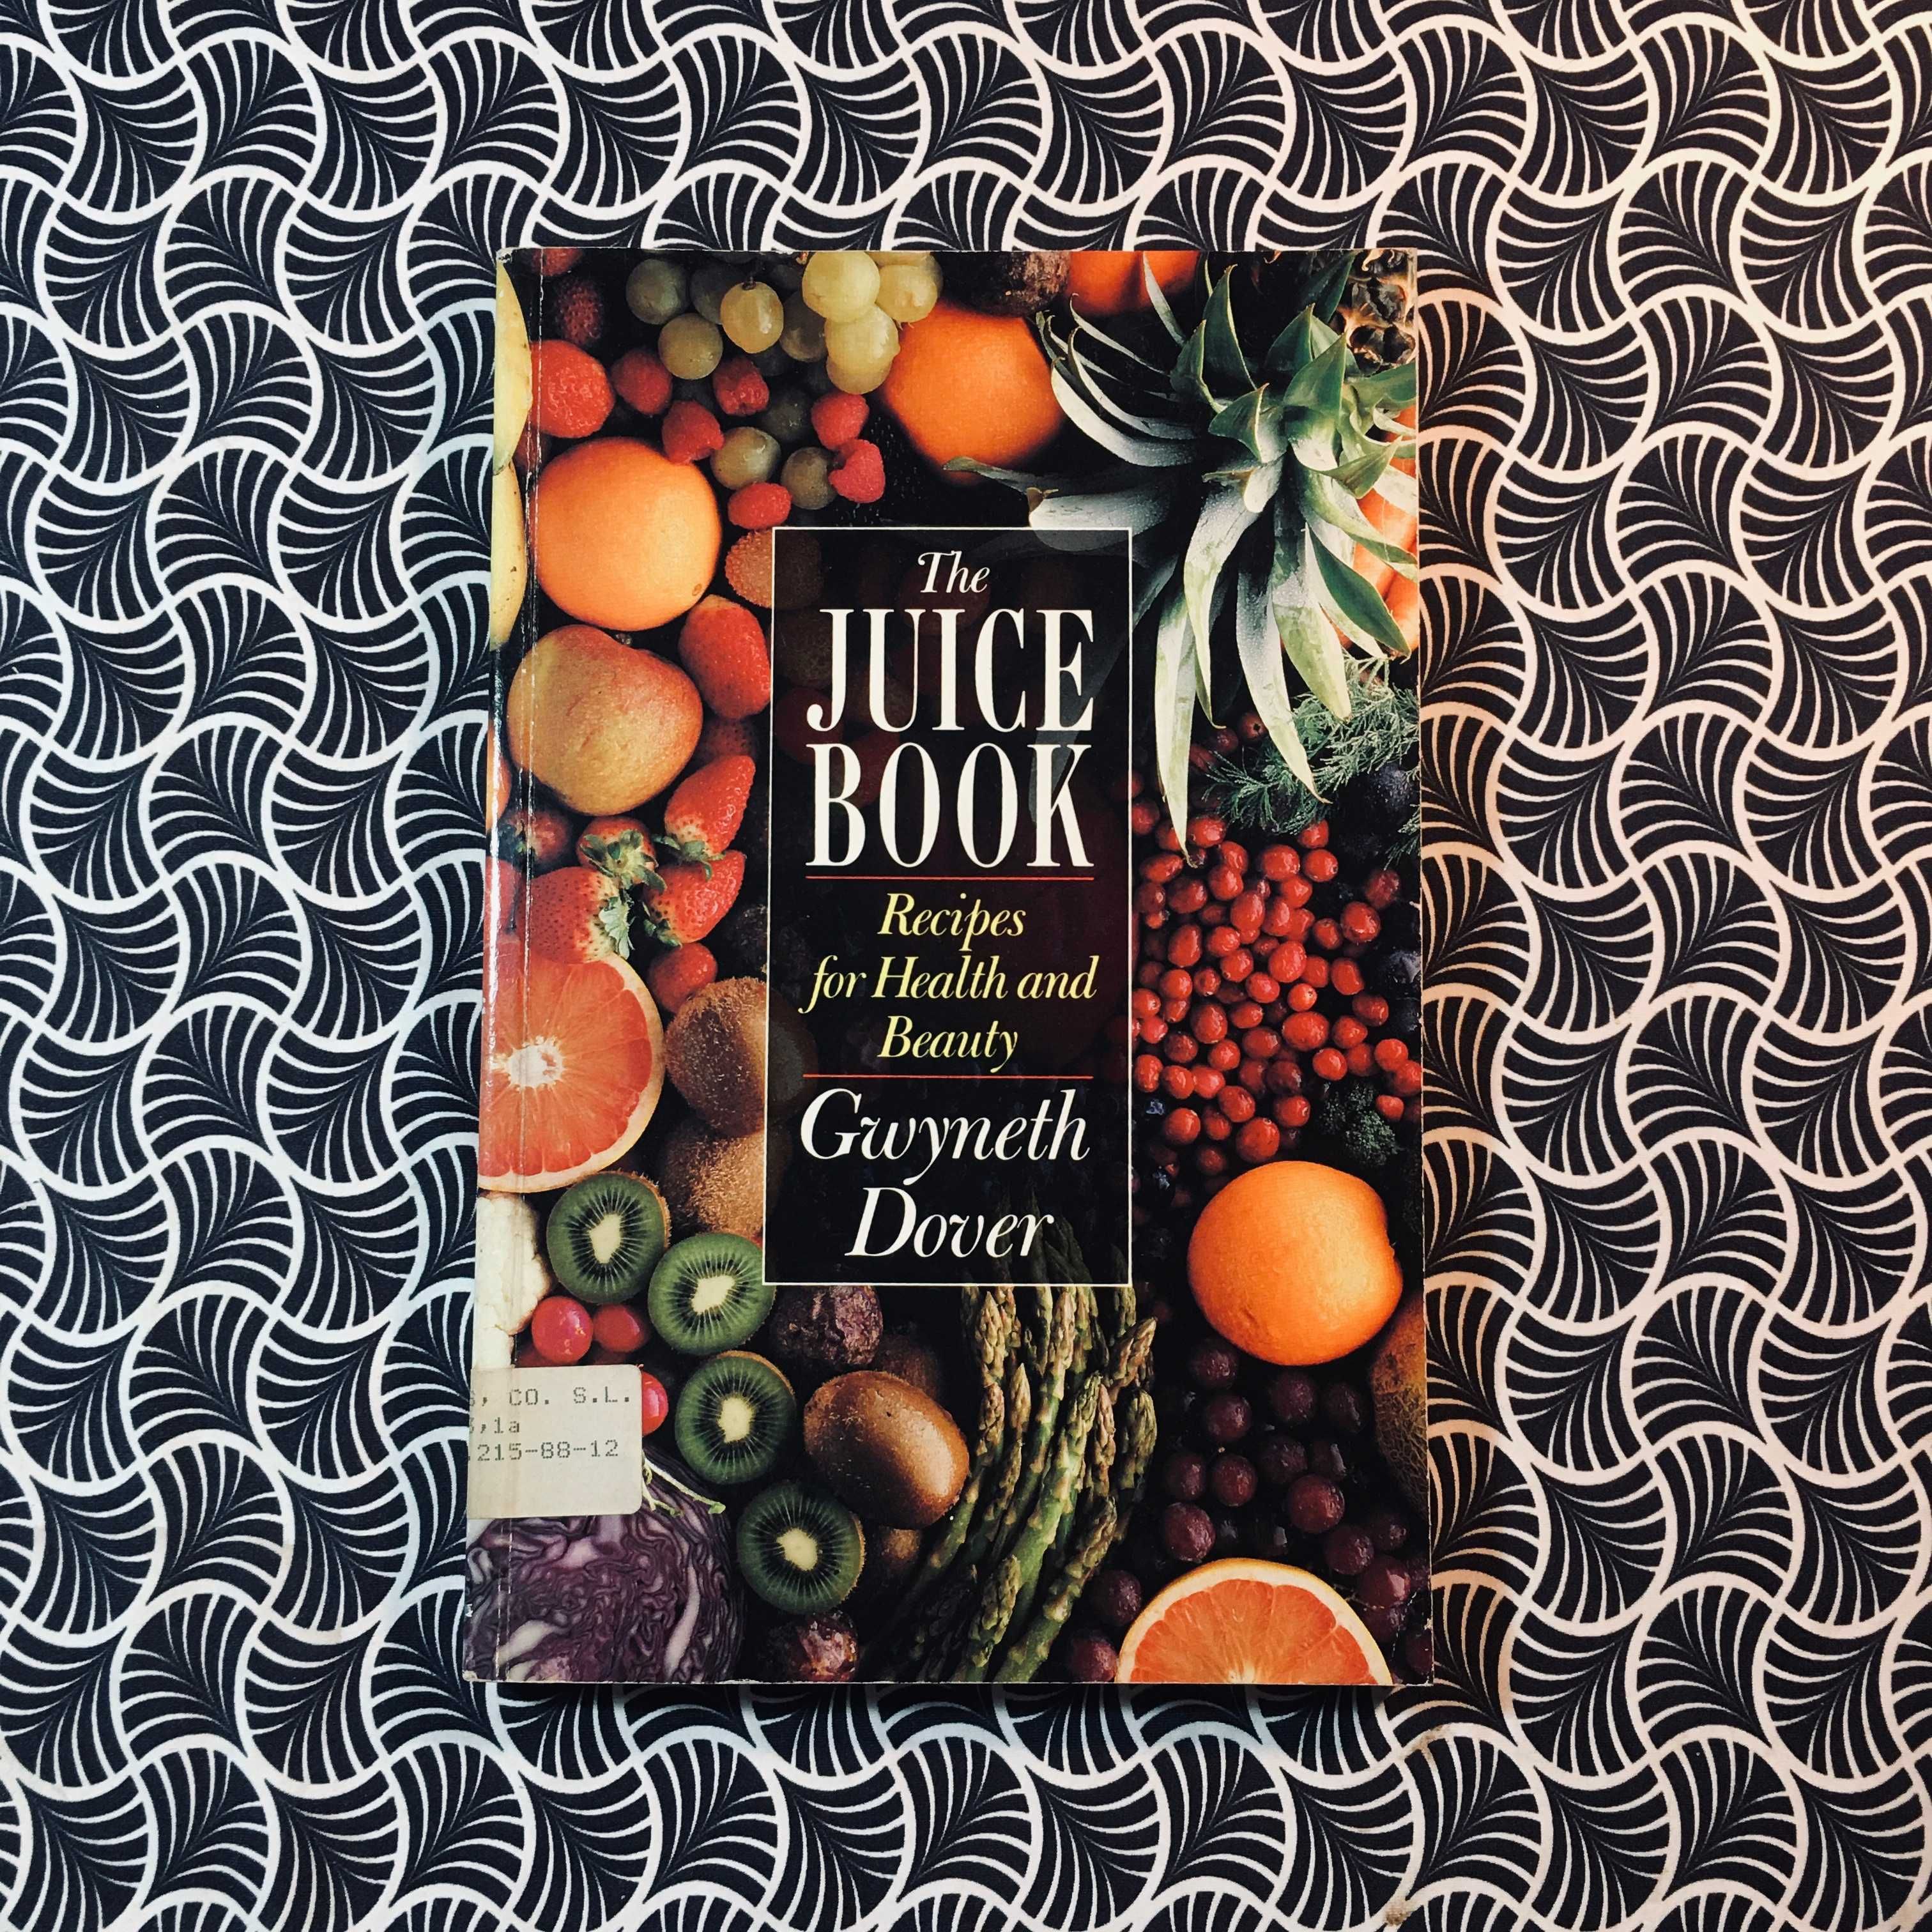 The Juice Book - Gwyneth Dover